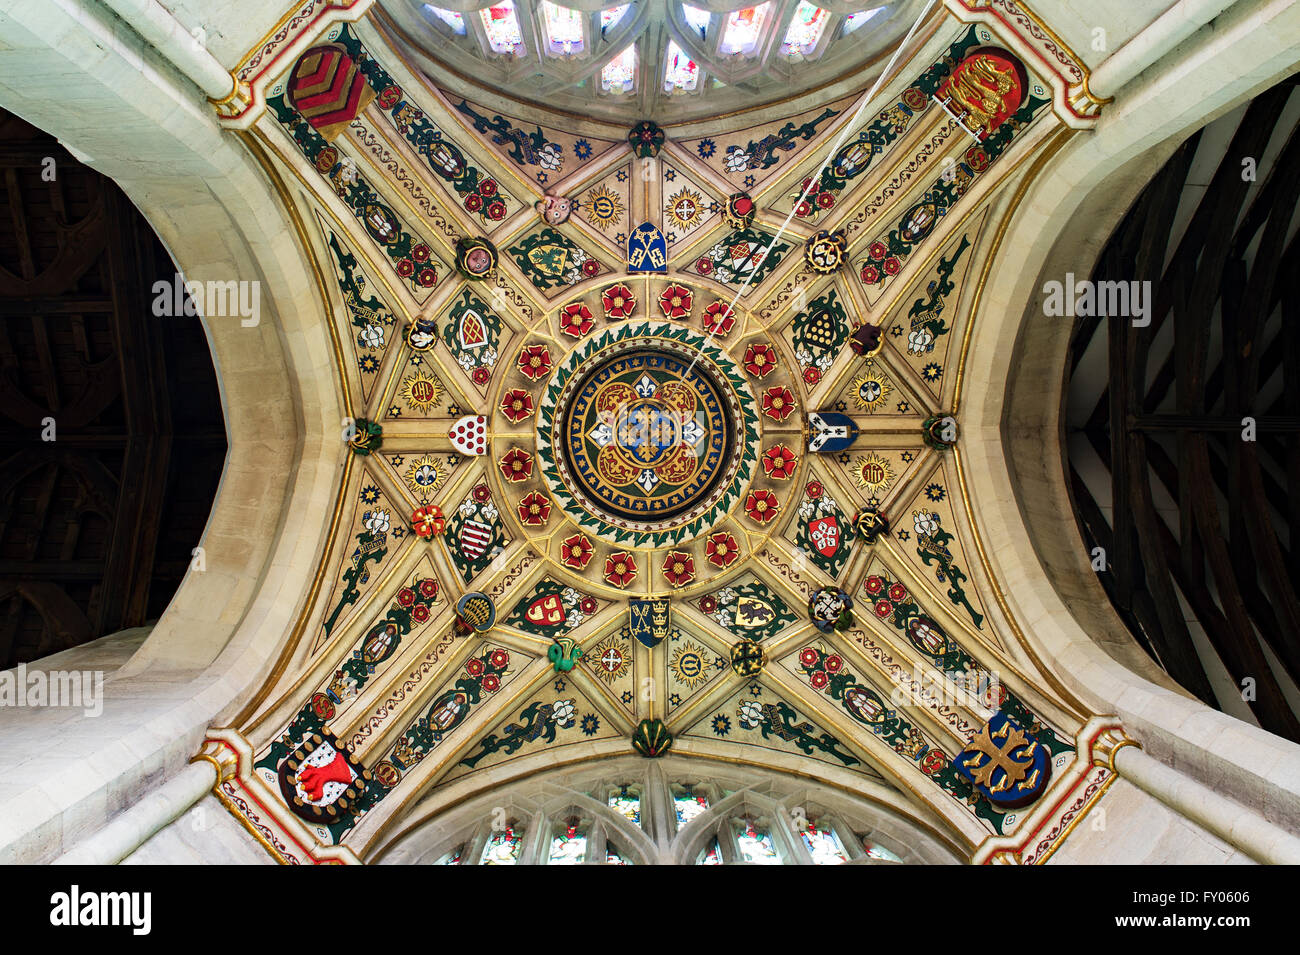 Decorative painted tower ceiling with heraldic shields in St Marys church,  Kempsford, Gloucestershire. England Stock Photo - Alamy